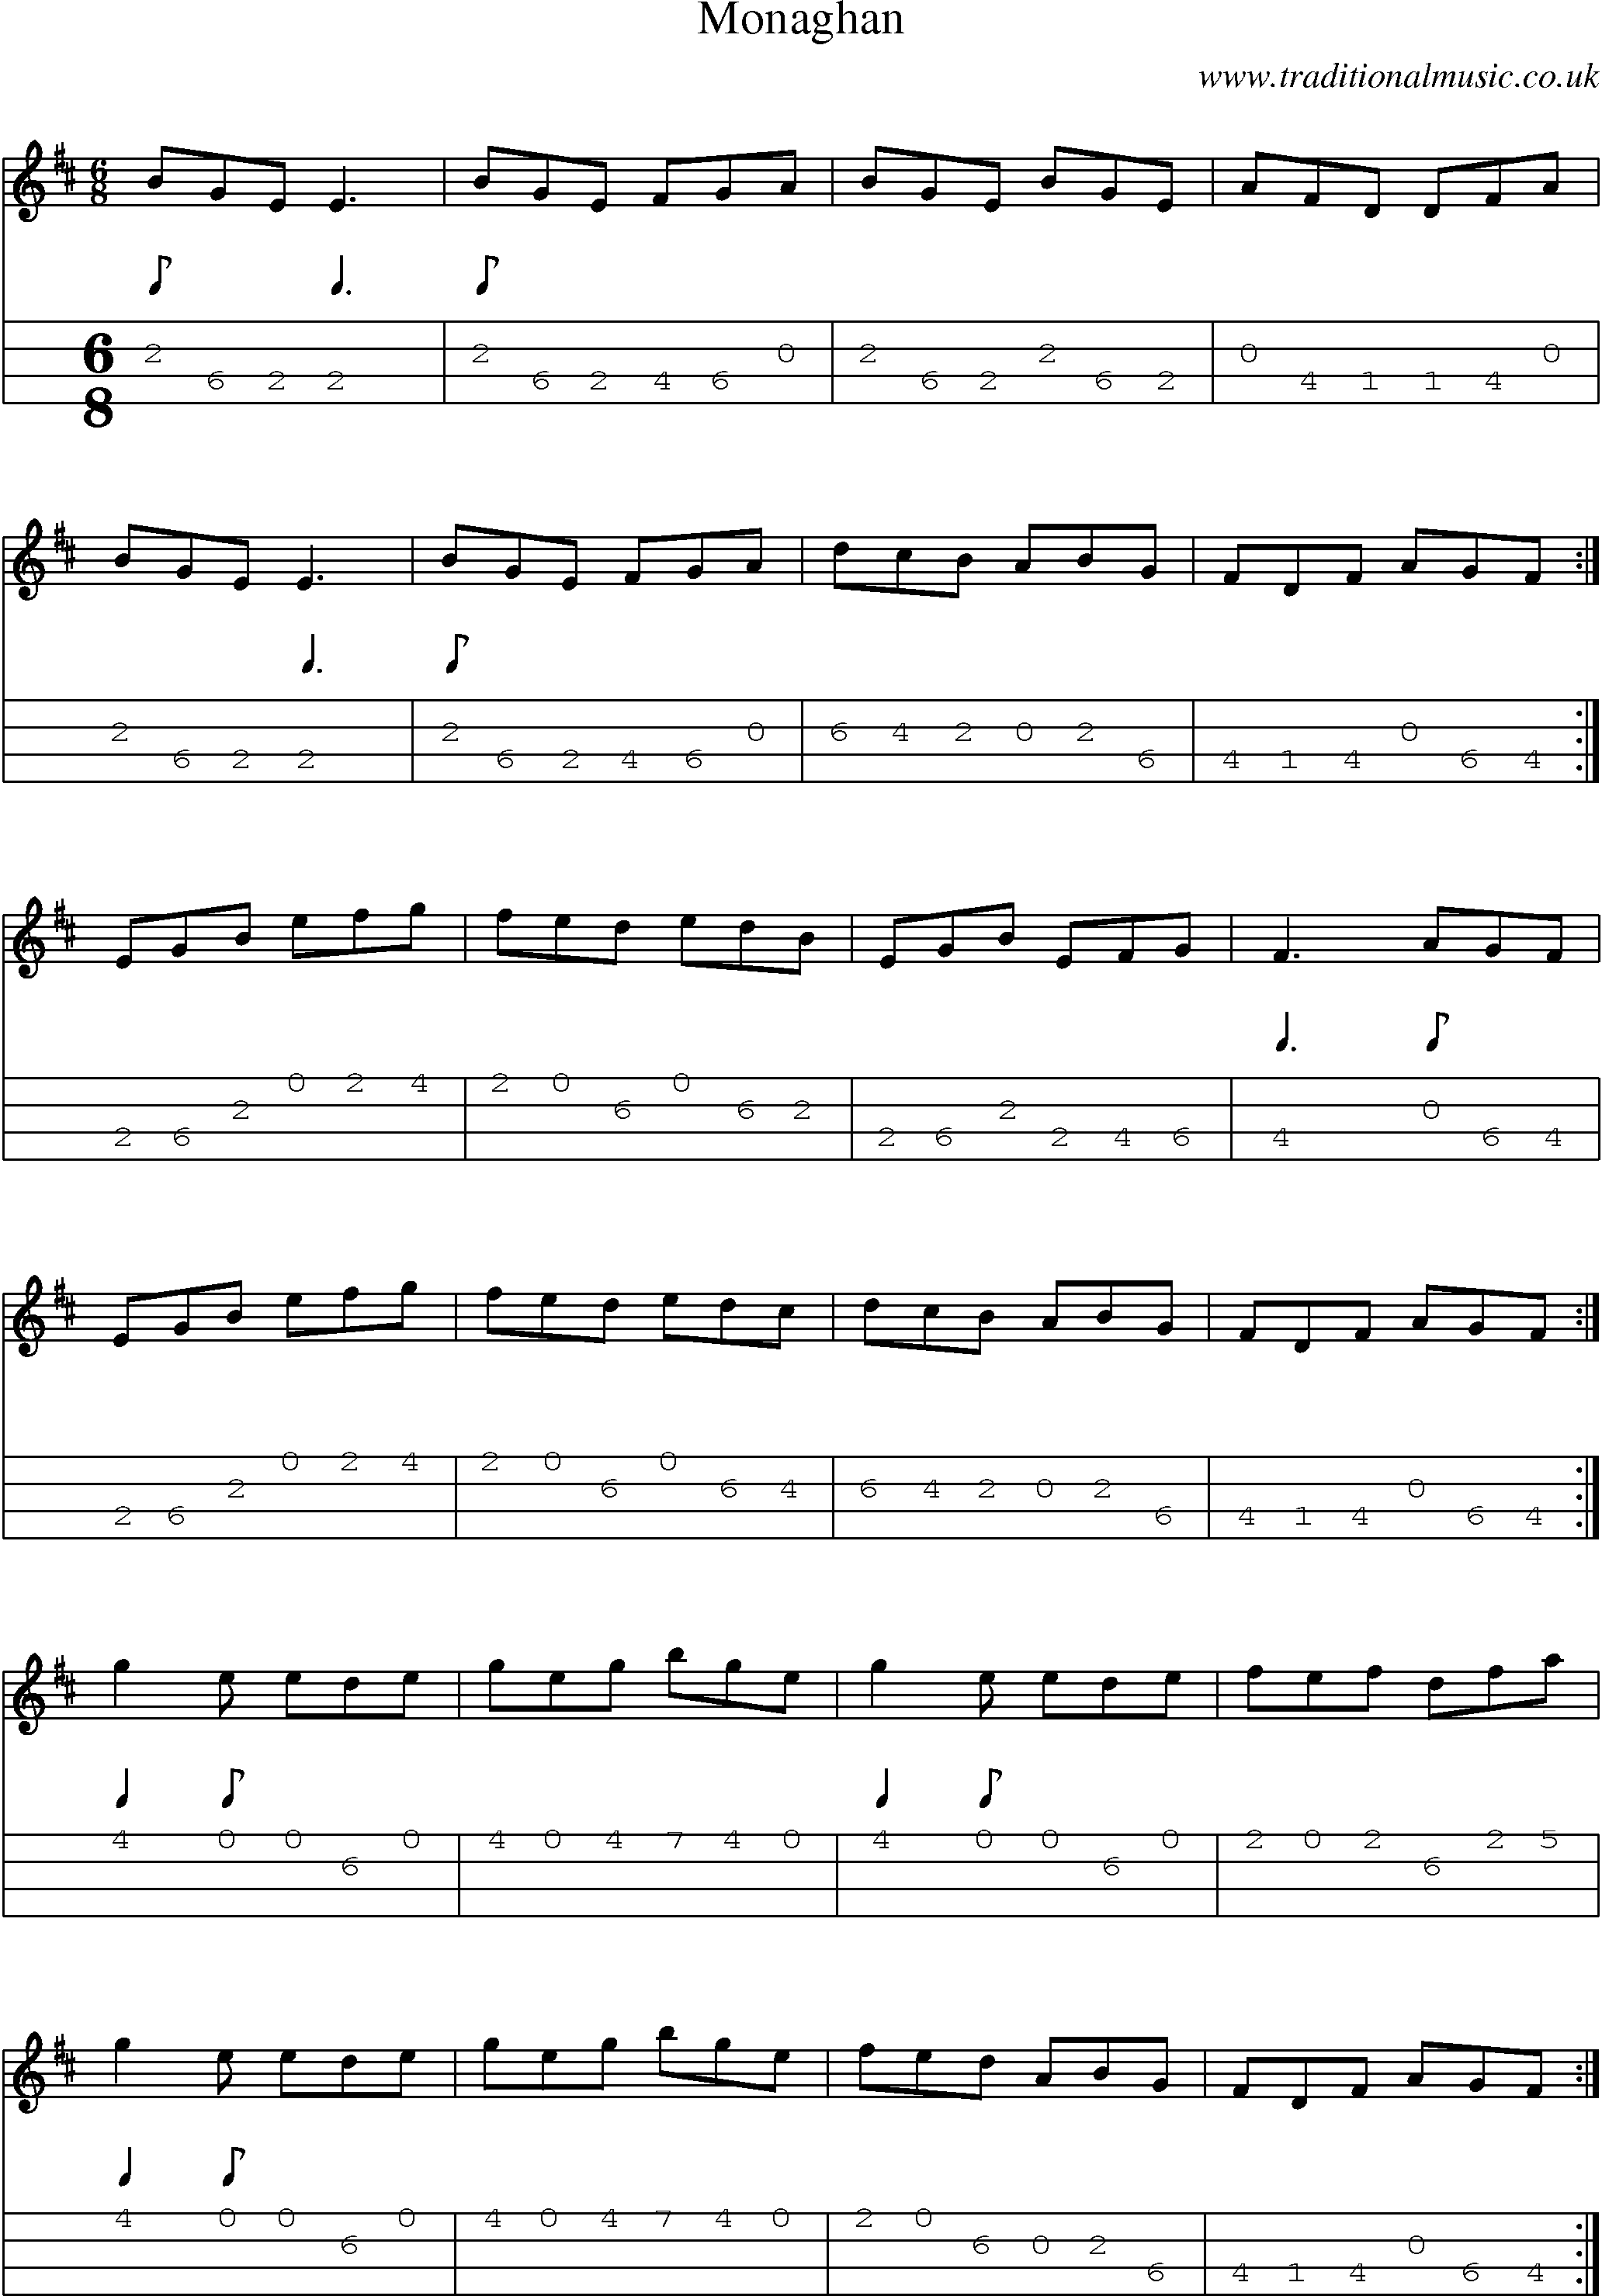 Music Score and Mandolin Tabs for Monaghan